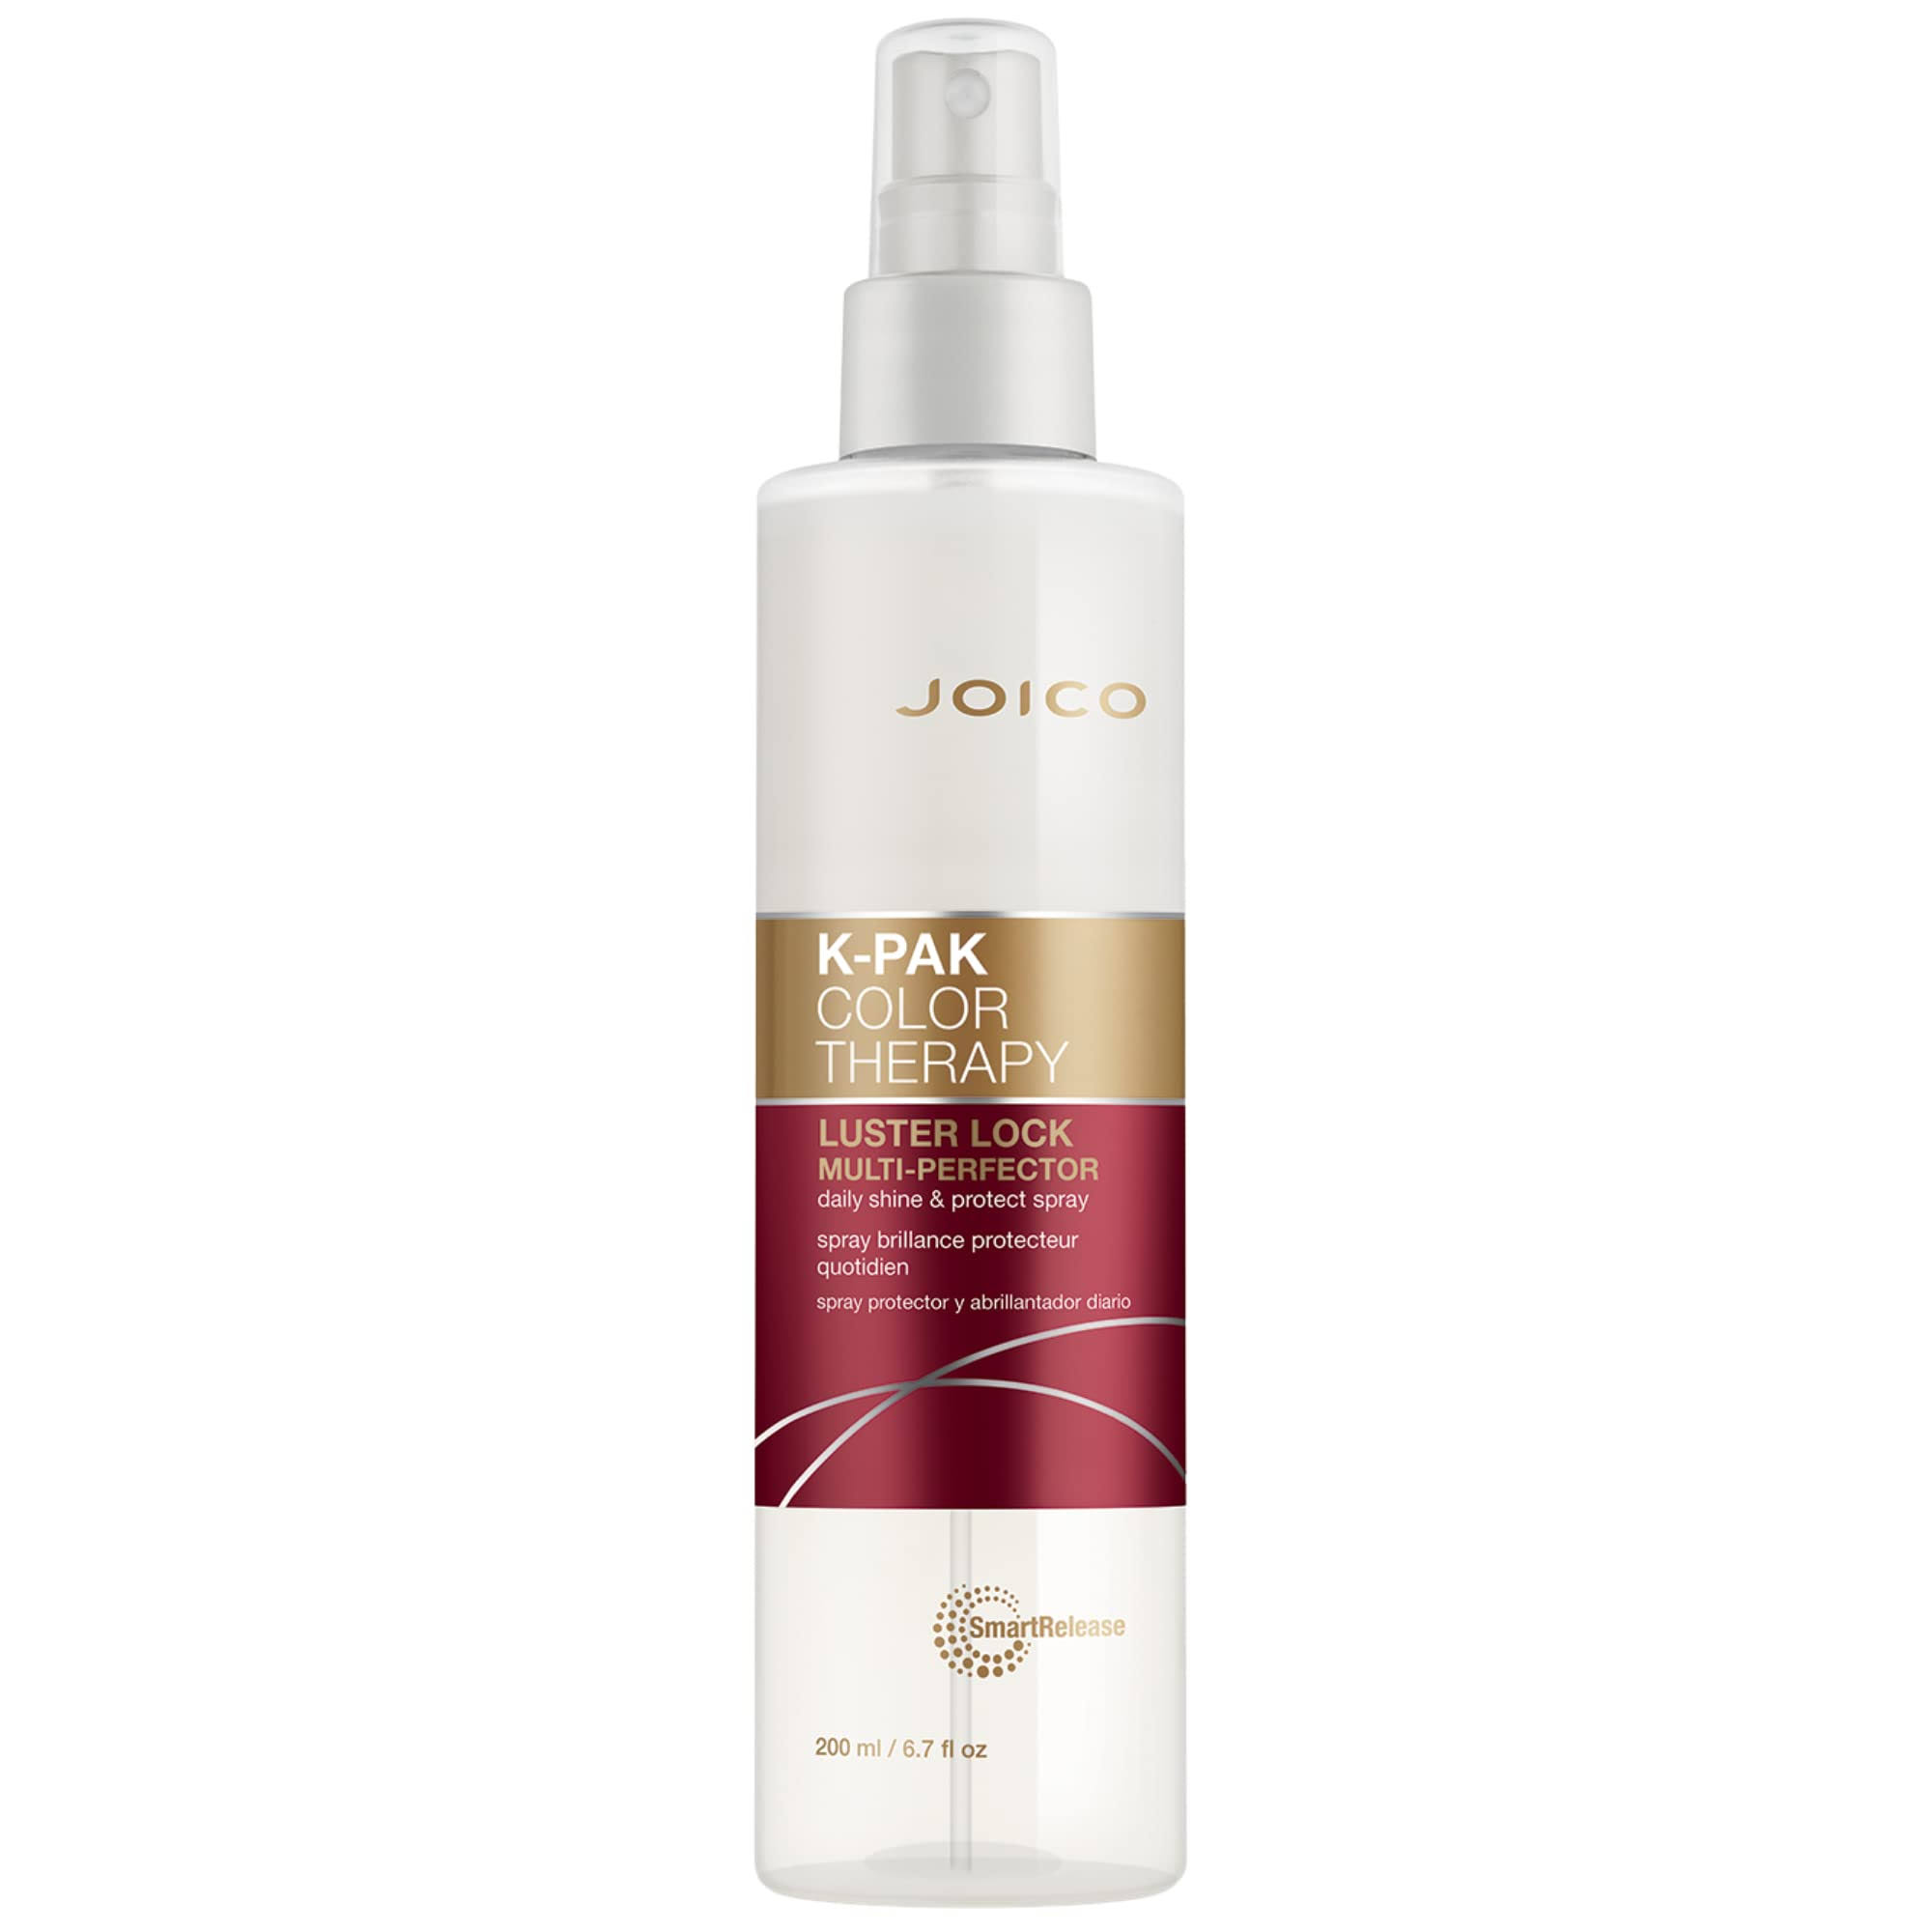 Joico K-Pak Color Therapy Luster Lock Multi-Perfector - Daily Shine & Protect Spray 200ml